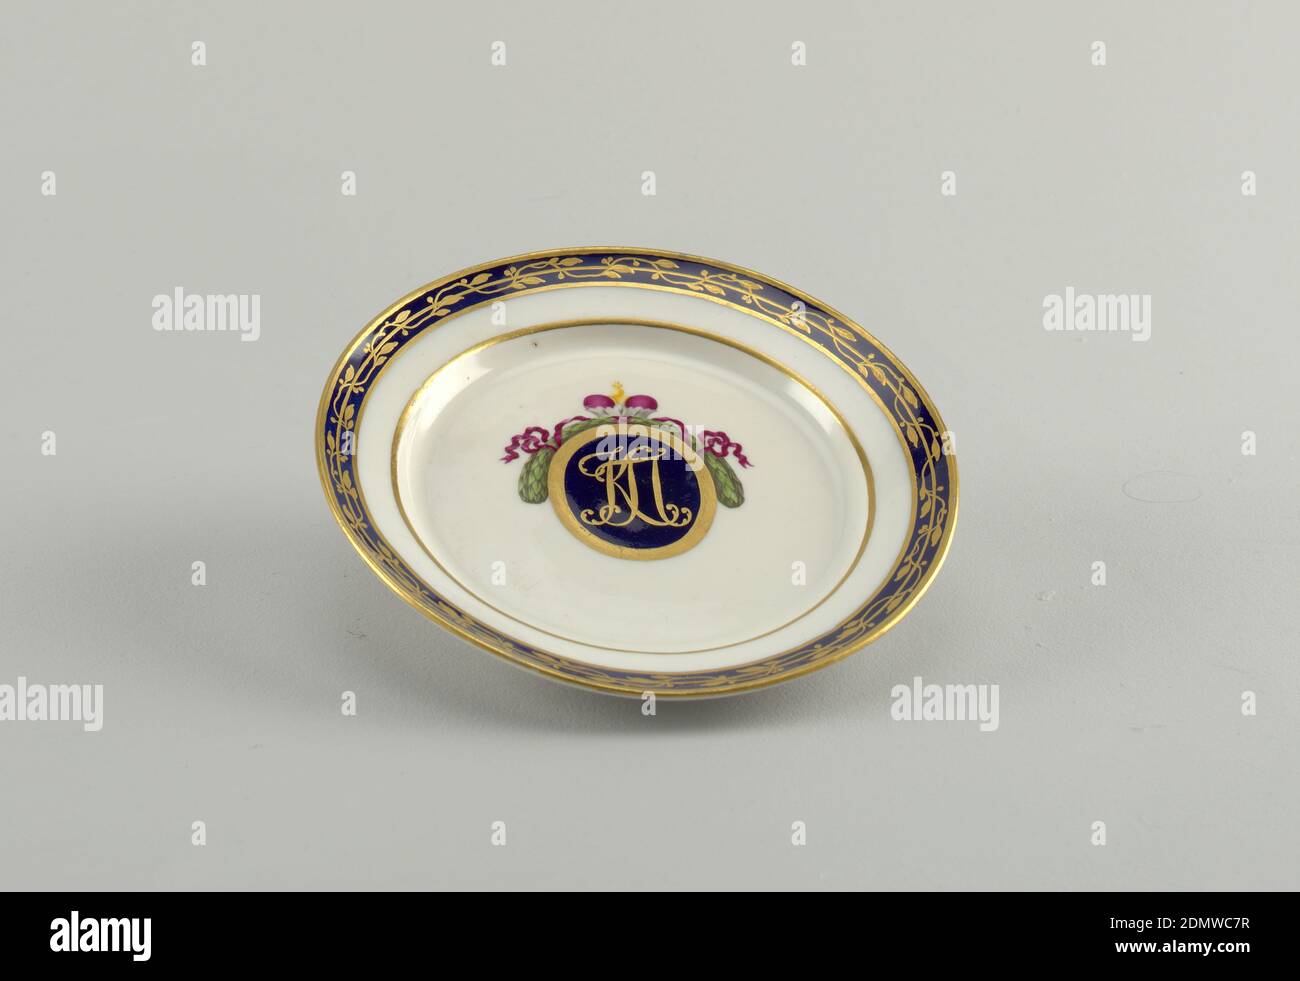 Plate, Imperial Porcelain Manufactory, St. Petersburg, Russia, Glazed porcelain, Dessert plate with gold monogram of Konstantin Pavlovich in blue oval, framed with gold and crested by purple crown and green wreath. Gold laurel on blue band around edge., St. Petersburg, Russia, ca. 1780, ceramics, Decorative Arts, Plate Stock Photo